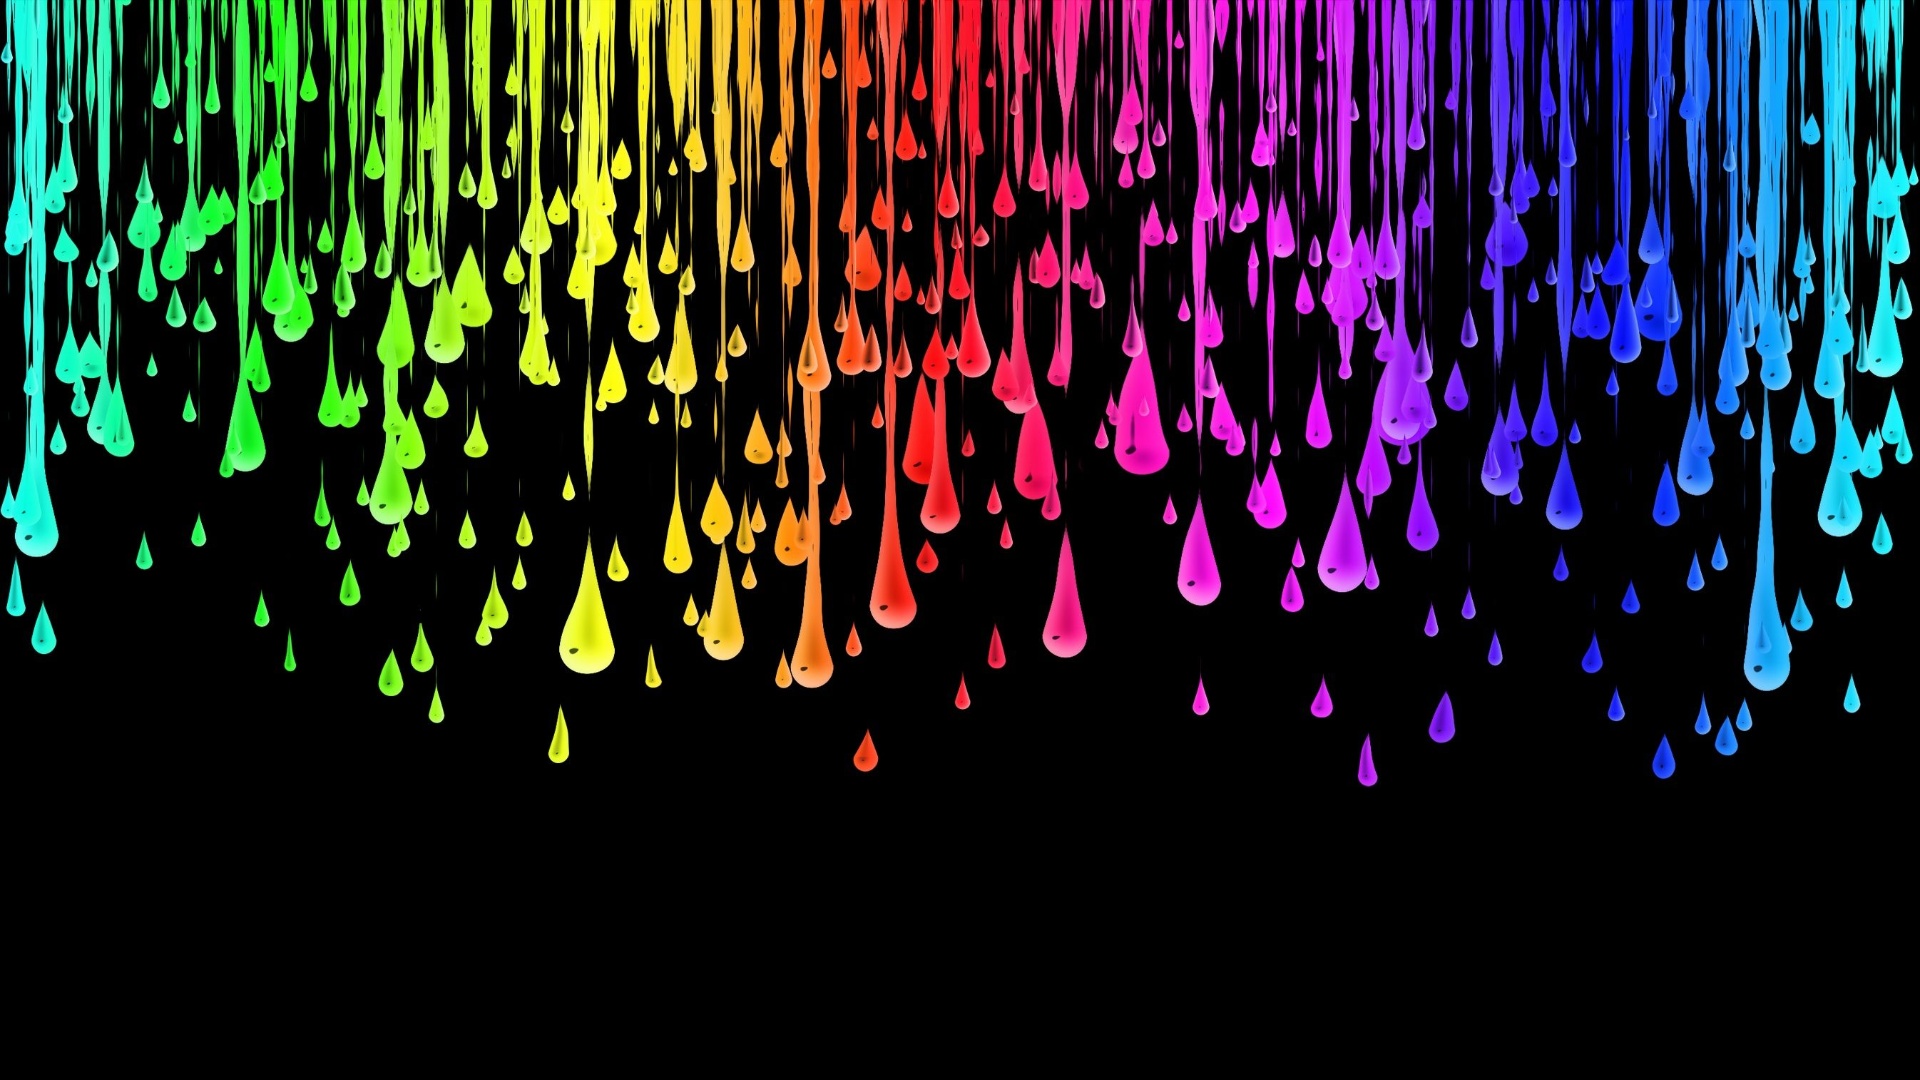 Drippy PC Backgrounds